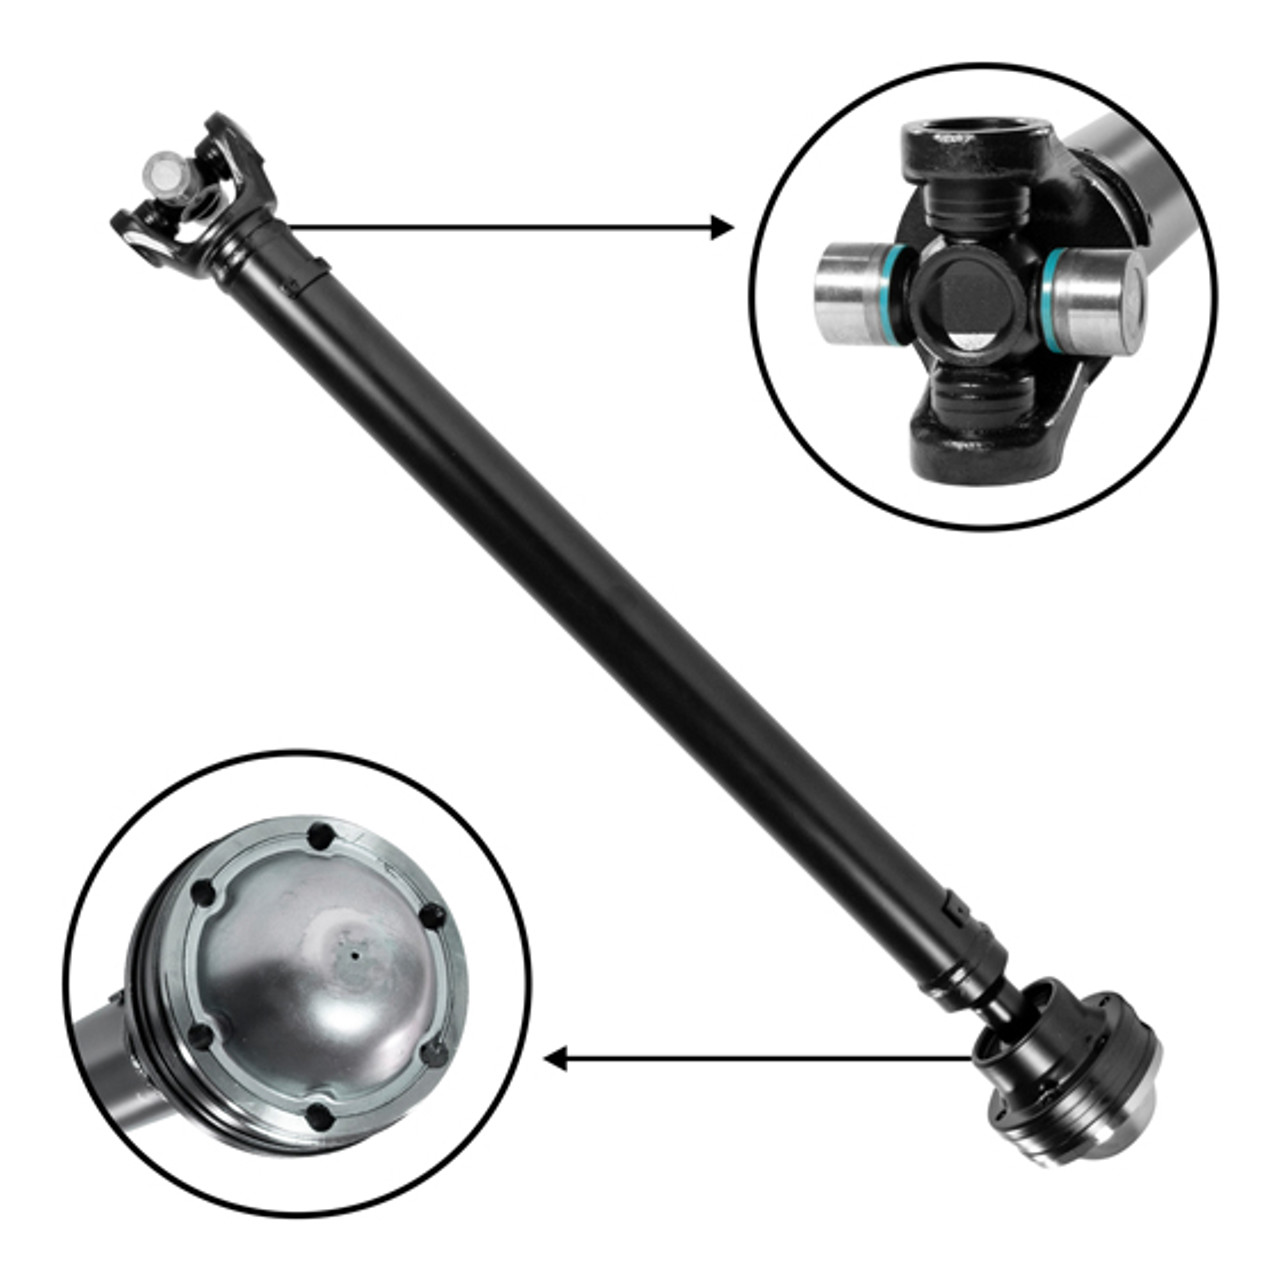 NEW USA Standard Front Driveshaft for Explorer Sport Trac & Mountaineer, 29-5/8" Flange to Center